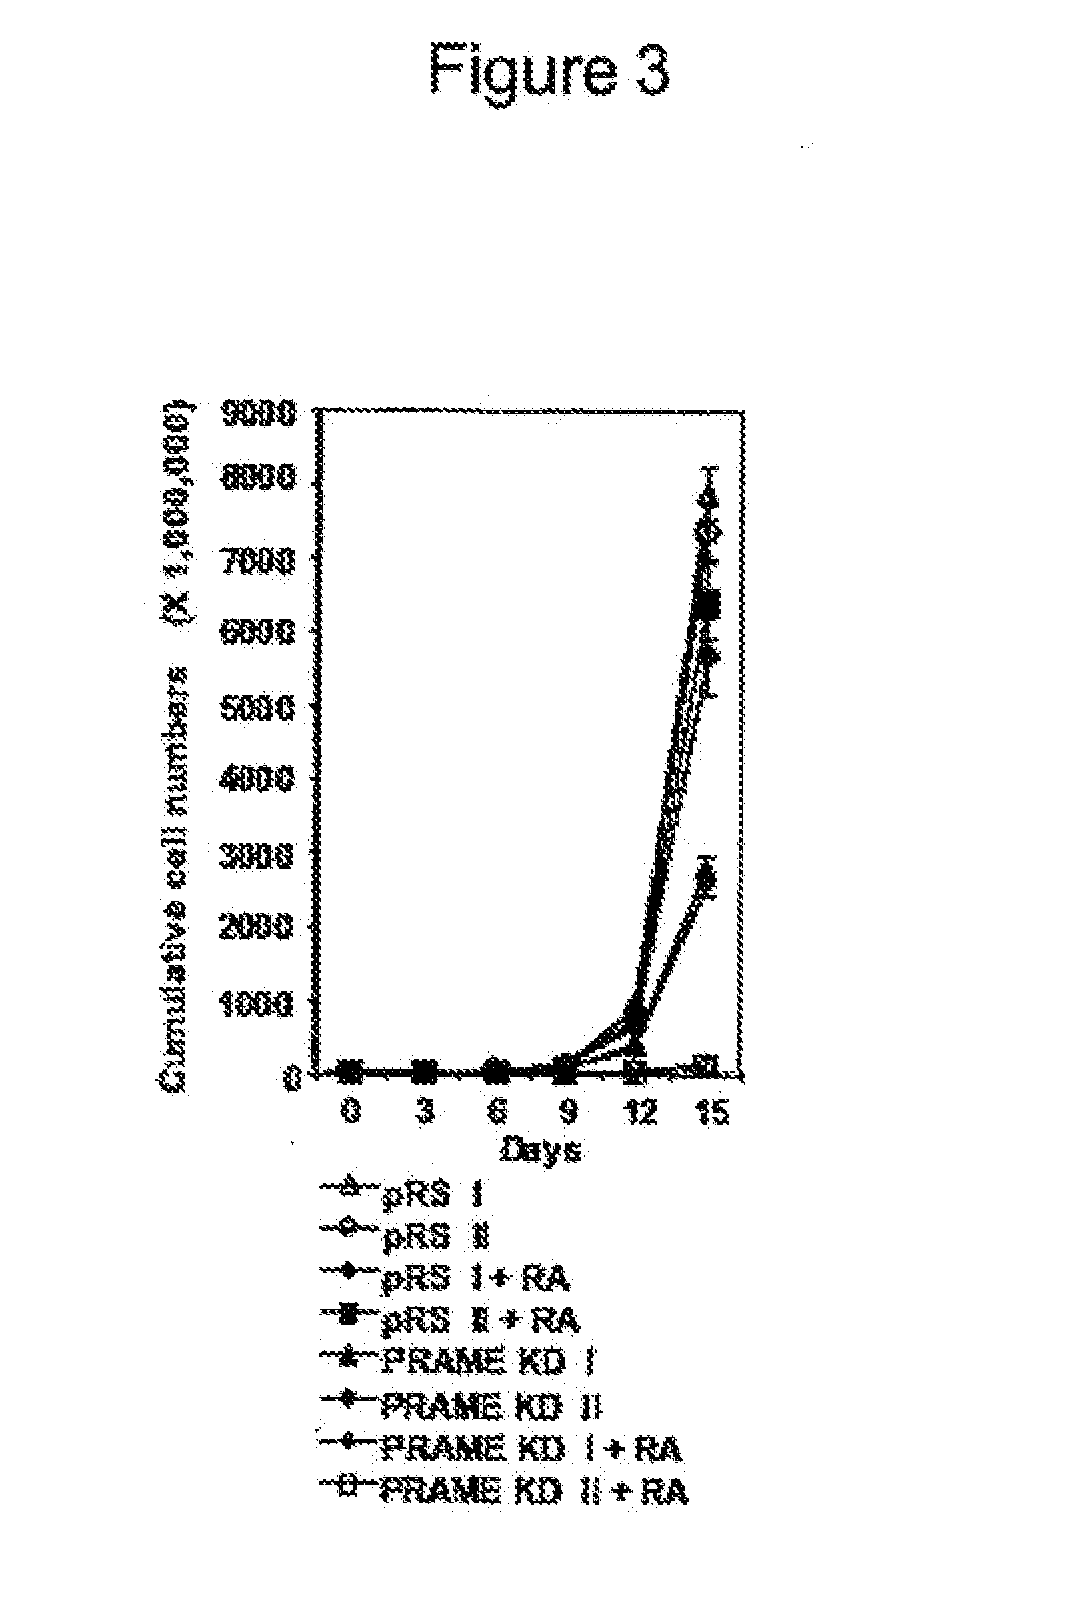 Combined use of prame inhibitors and HDAC inhibitors